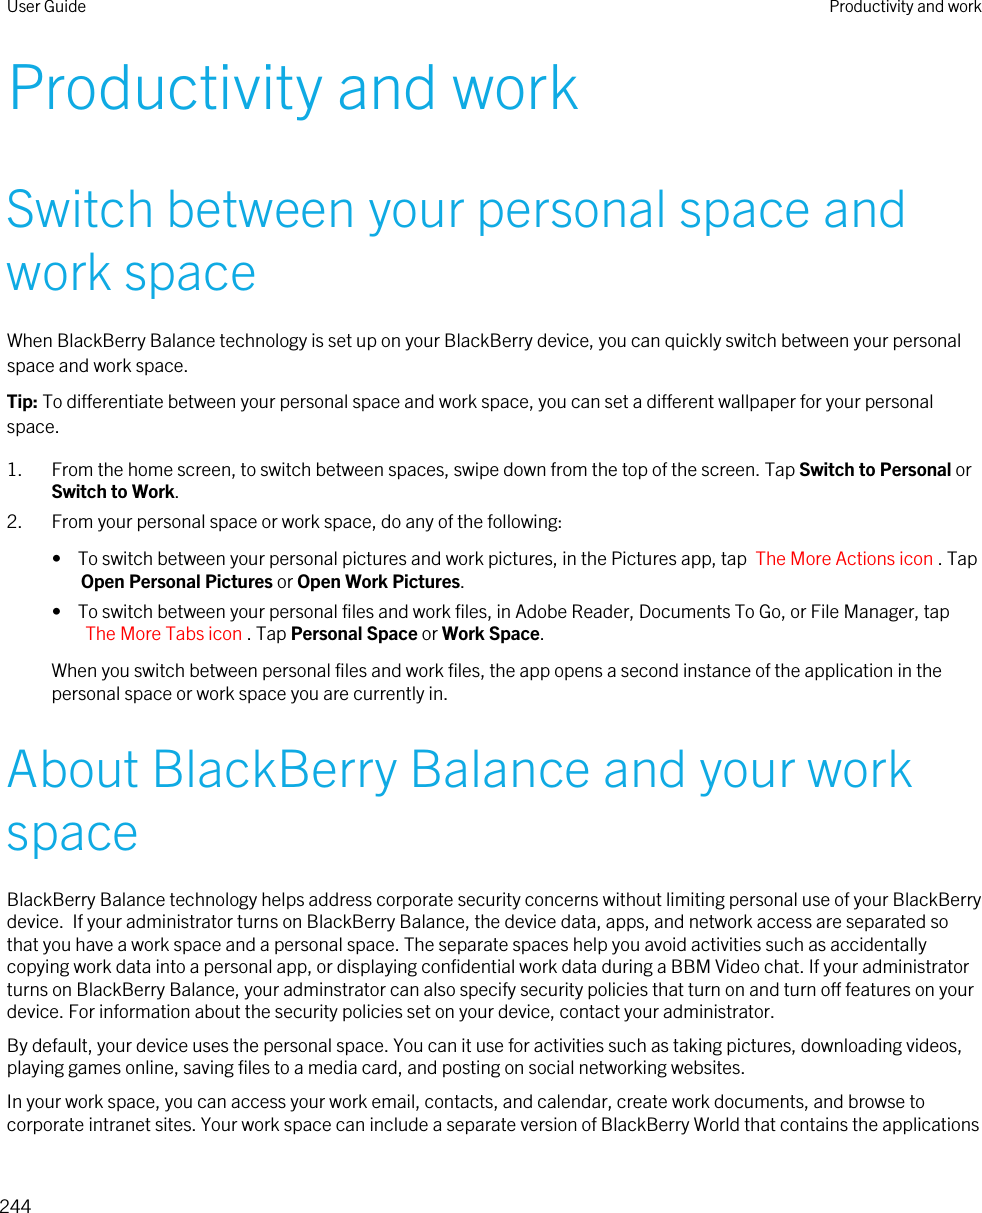 Productivity and workSwitch between your personal space and work spaceWhen BlackBerry Balance technology is set up on your BlackBerry device, you can quickly switch between your personal space and work space.Tip: To differentiate between your personal space and work space, you can set a different wallpaper for your personal space.1. From the home screen, to switch between spaces, swipe down from the top of the screen. Tap Switch to Personal or Switch to Work.2. From your personal space or work space, do any of the following:•  To switch between your personal pictures and work pictures, in the Pictures app, tap  The More Actions icon . Tap Open Personal Pictures or Open Work Pictures.•  To switch between your personal files and work files, in Adobe Reader, Documents To Go, or File Manager, tap The More Tabs icon . Tap Personal Space or Work Space.When you switch between personal files and work files, the app opens a second instance of the application in the personal space or work space you are currently in.About BlackBerry Balance and your work spaceBlackBerry Balance technology helps address corporate security concerns without limiting personal use of your BlackBerry device.  If your administrator turns on BlackBerry Balance, the device data, apps, and network access are separated so that you have a work space and a personal space. The separate spaces help you avoid activities such as accidentally copying work data into a personal app, or displaying confidential work data during a BBM Video chat. If your administrator turns on BlackBerry Balance, your adminstrator can also specify security policies that turn on and turn off features on your device. For information about the security policies set on your device, contact your administrator.By default, your device uses the personal space. You can it use for activities such as taking pictures, downloading videos, playing games online, saving files to a media card, and posting on social networking websites.In your work space, you can access your work email, contacts, and calendar, create work documents, and browse to corporate intranet sites. Your work space can include a separate version of BlackBerry World that contains the applications User Guide Productivity and work244